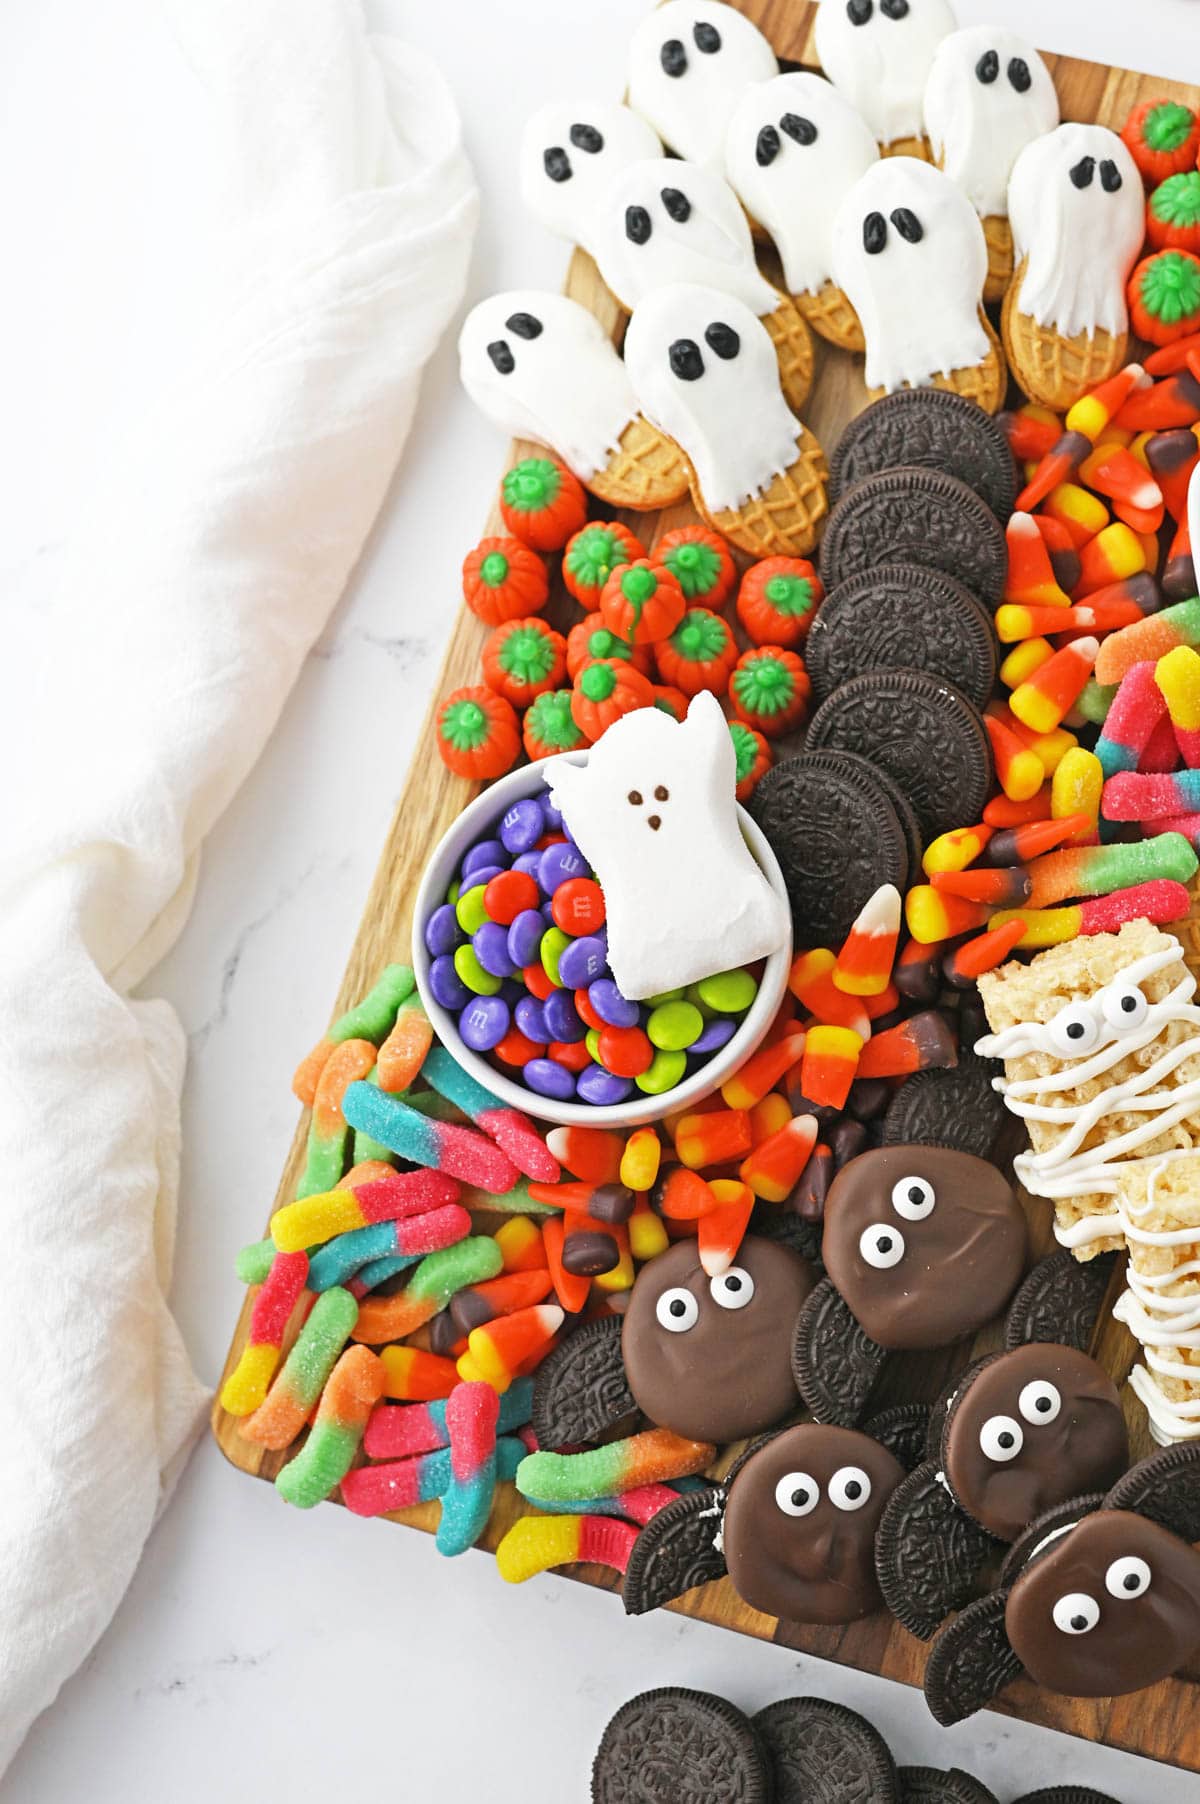 Cookies ghosts and bats with other Halloween candy and food